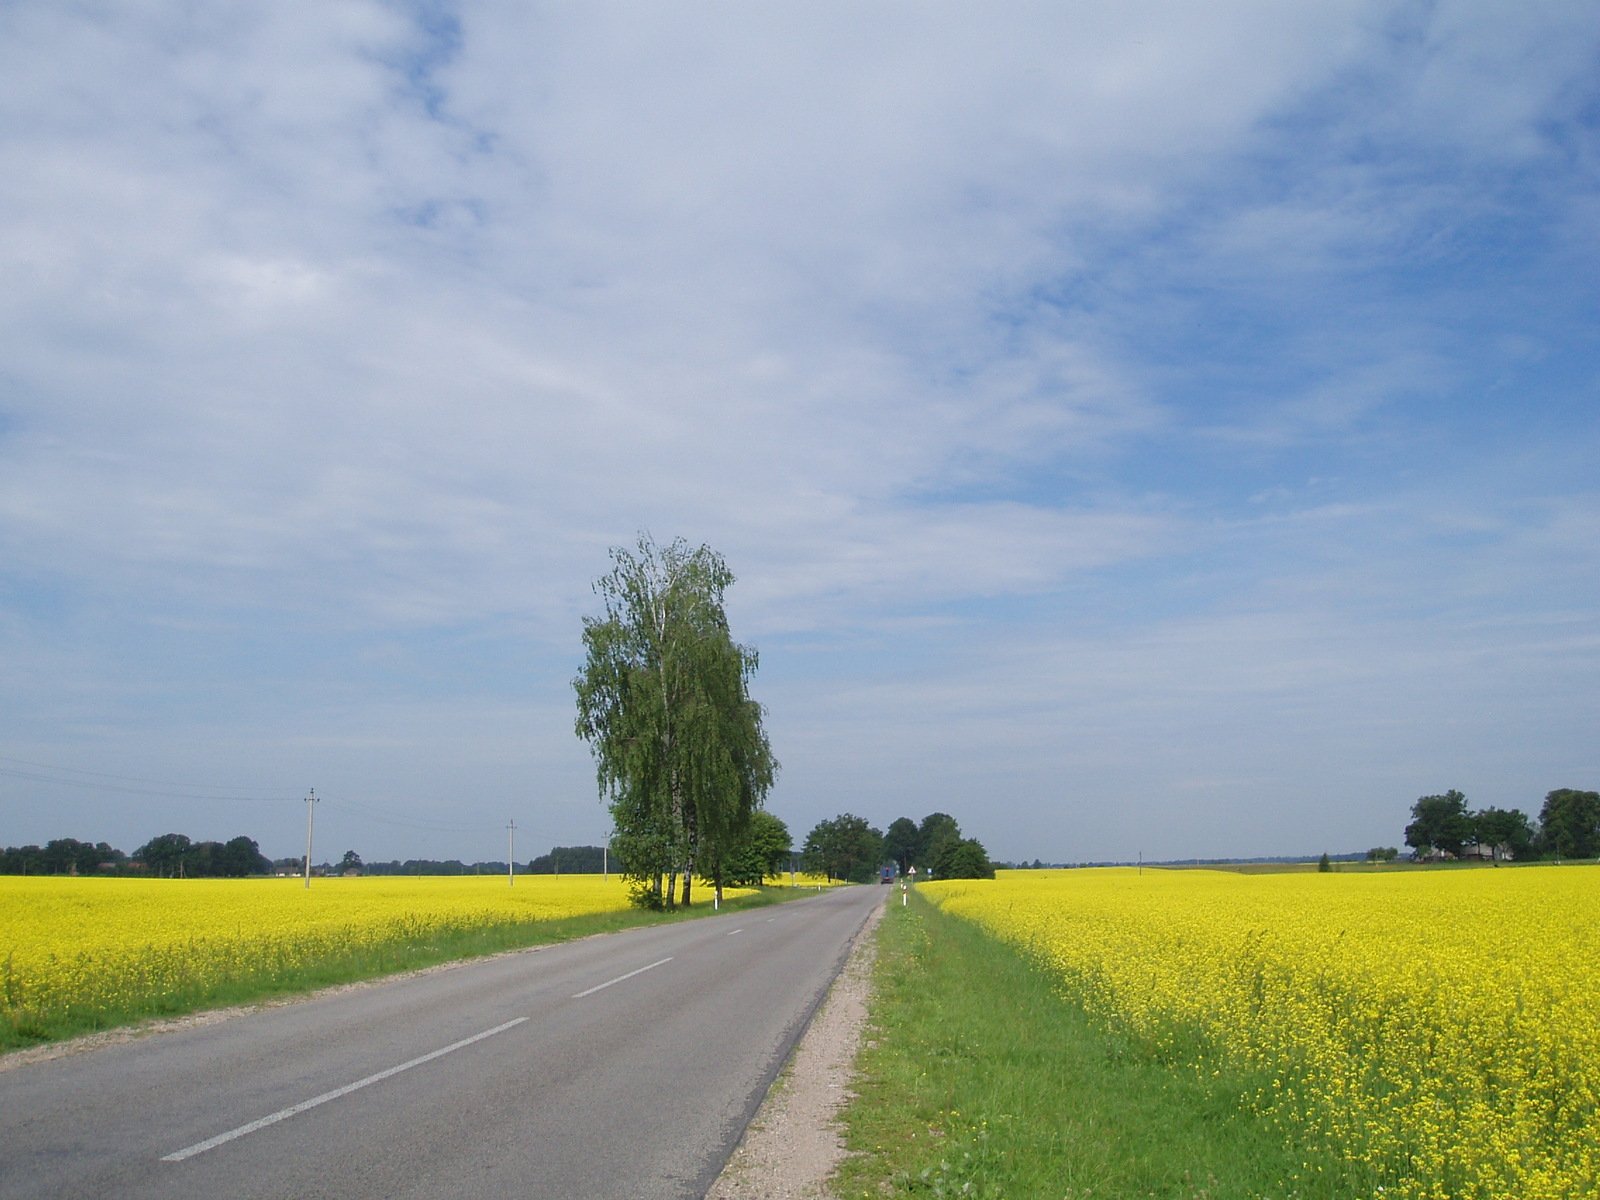 a road winds through a canola field and an area with a single tree